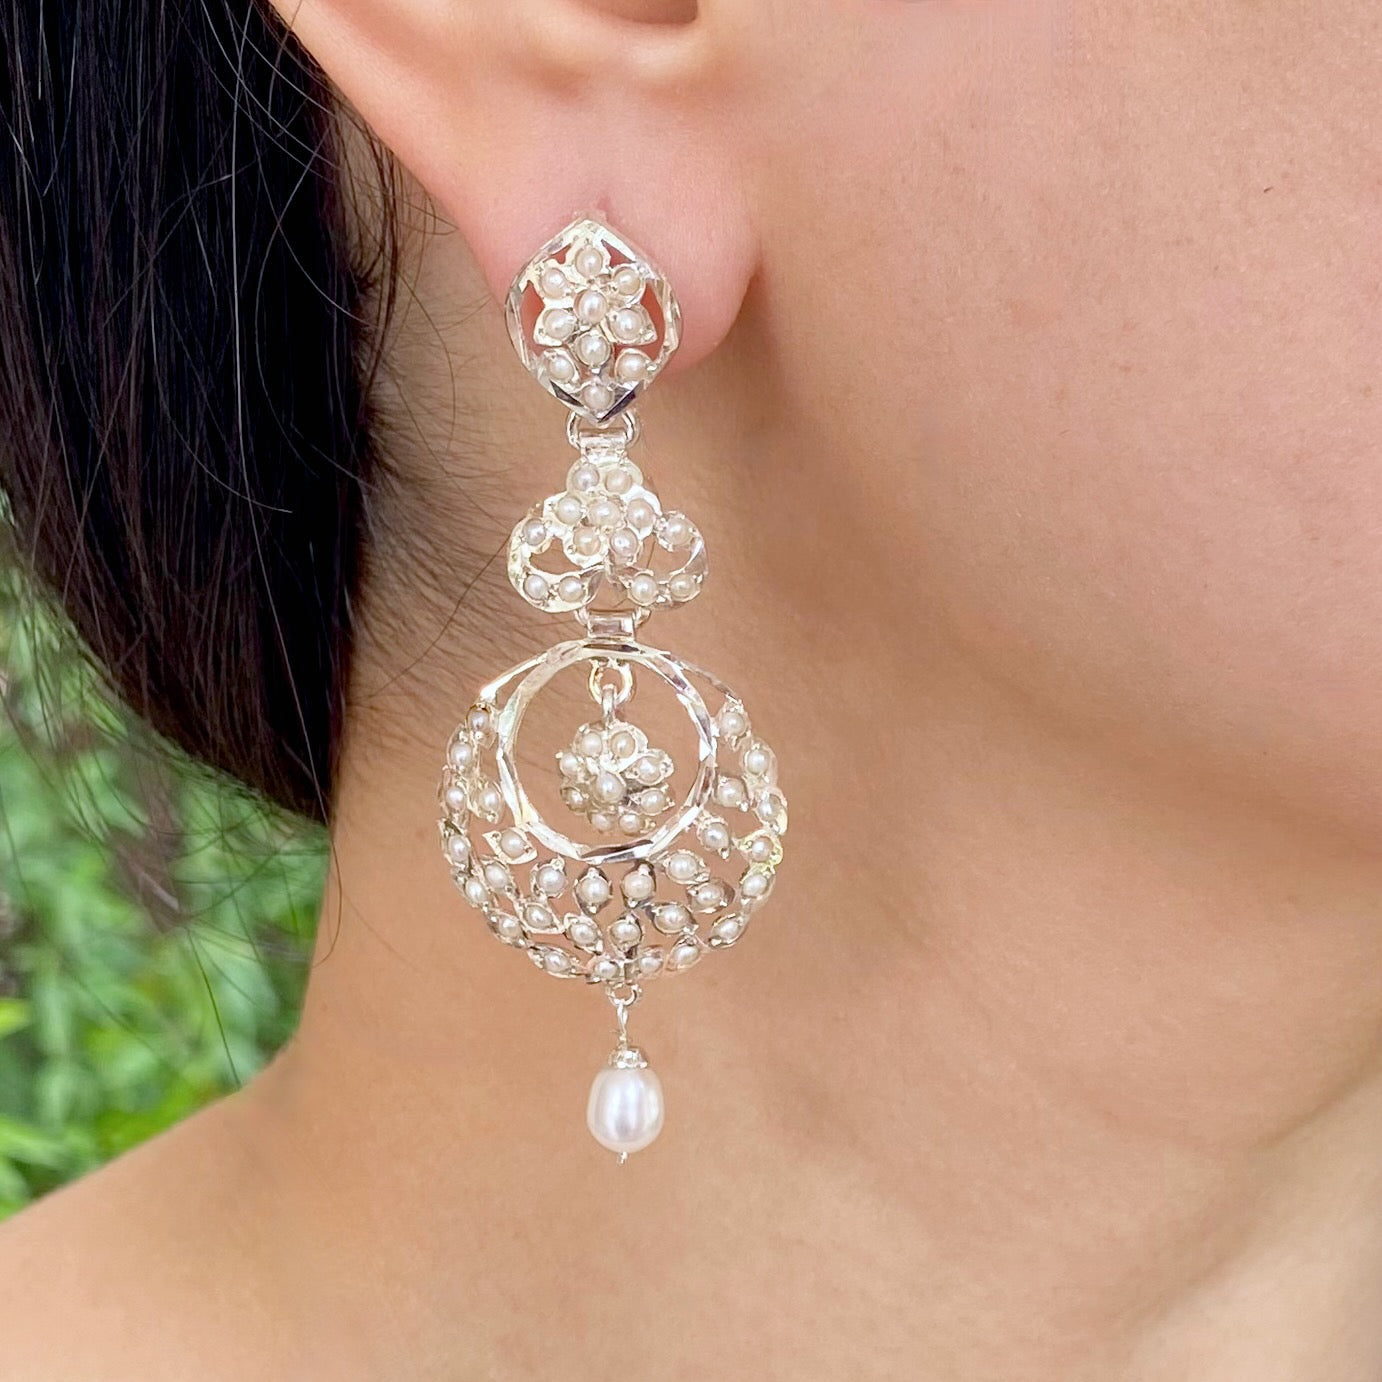 silver earrings for girls without gold plating